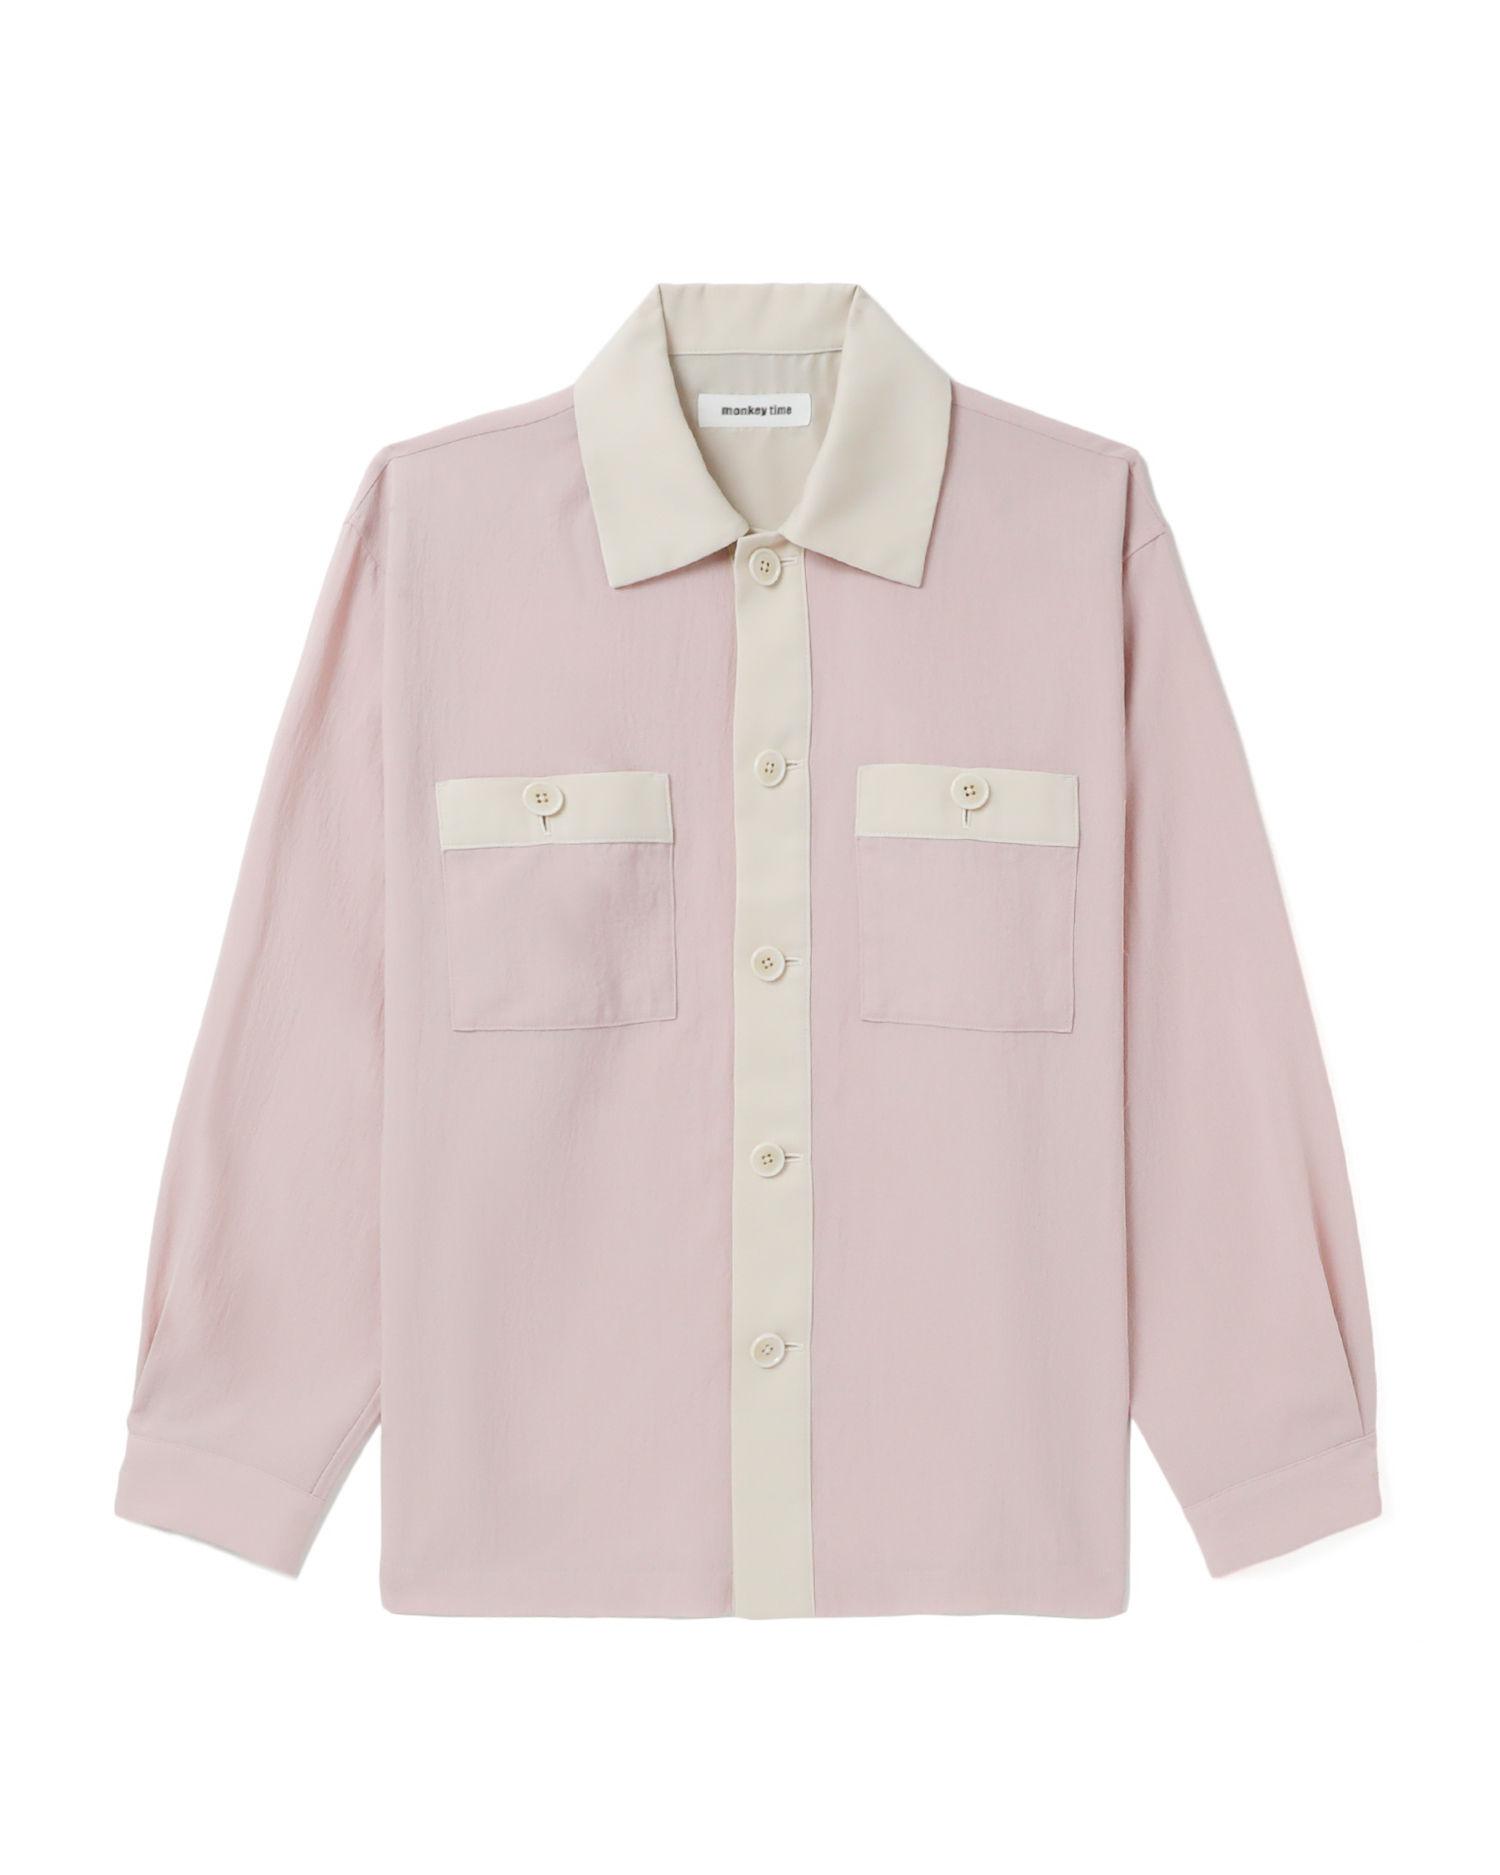 Buttoned shirt by BEAUTY&YOUTH MONKEY TIME